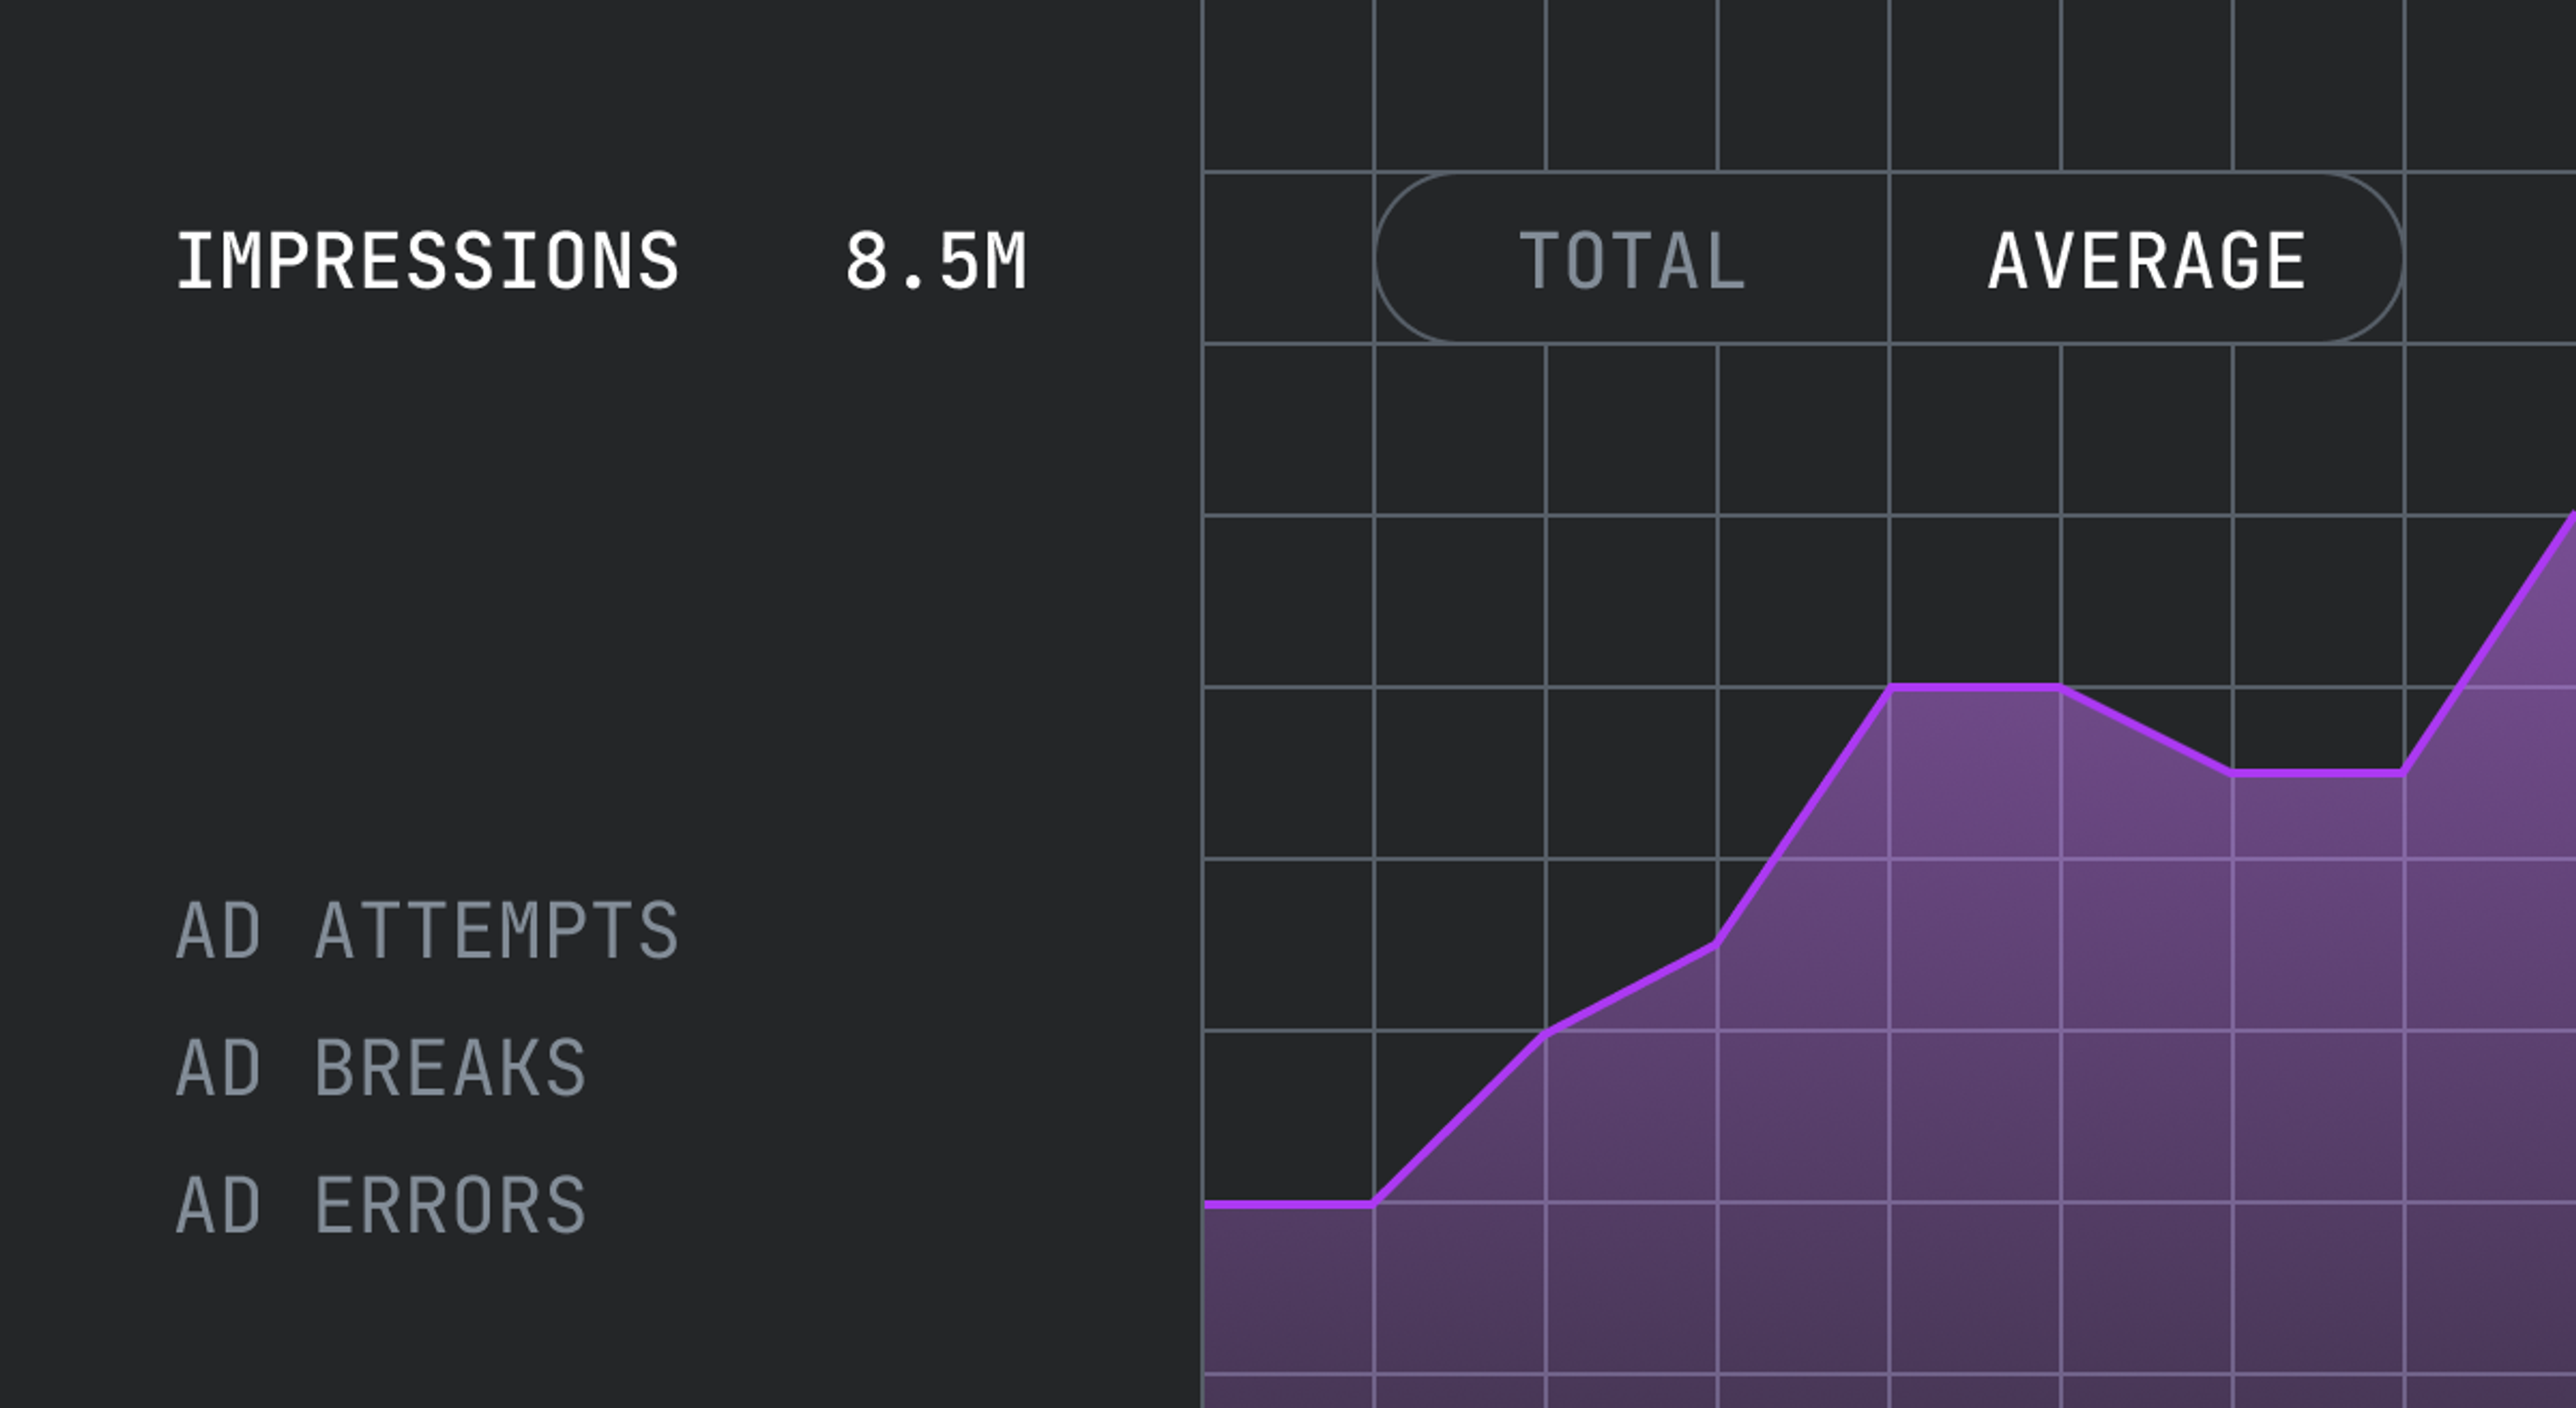 On a black background is a chart in purple that's moving up, to the right. Above the chart it reads total and average. To the left there's a list of Ad Metrics. Ad impressions at 8.5M, Ad attempts, Ad breaks, Ad errors